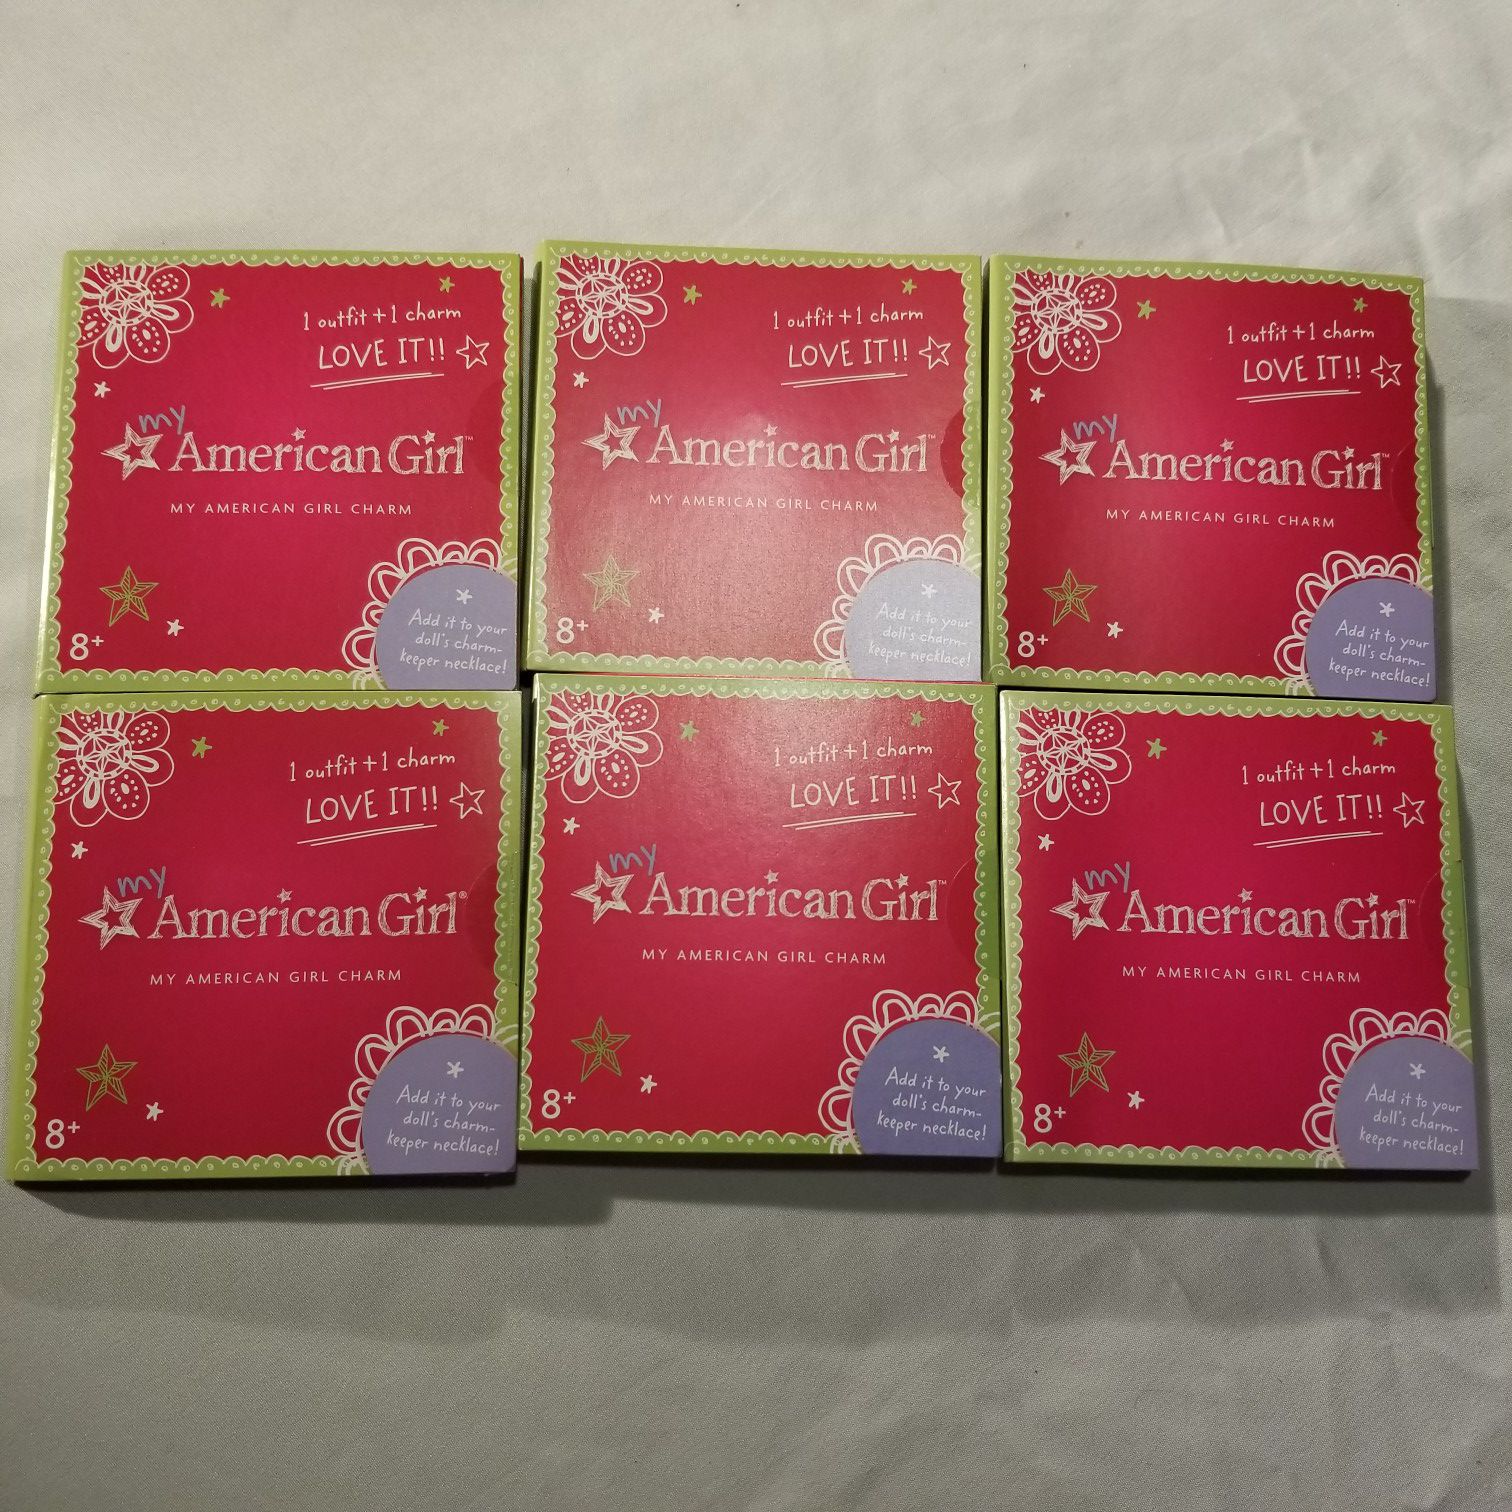 Lot of 6 American Girl charms jewelry necklace * 6 charms $2 each or $10 for 6